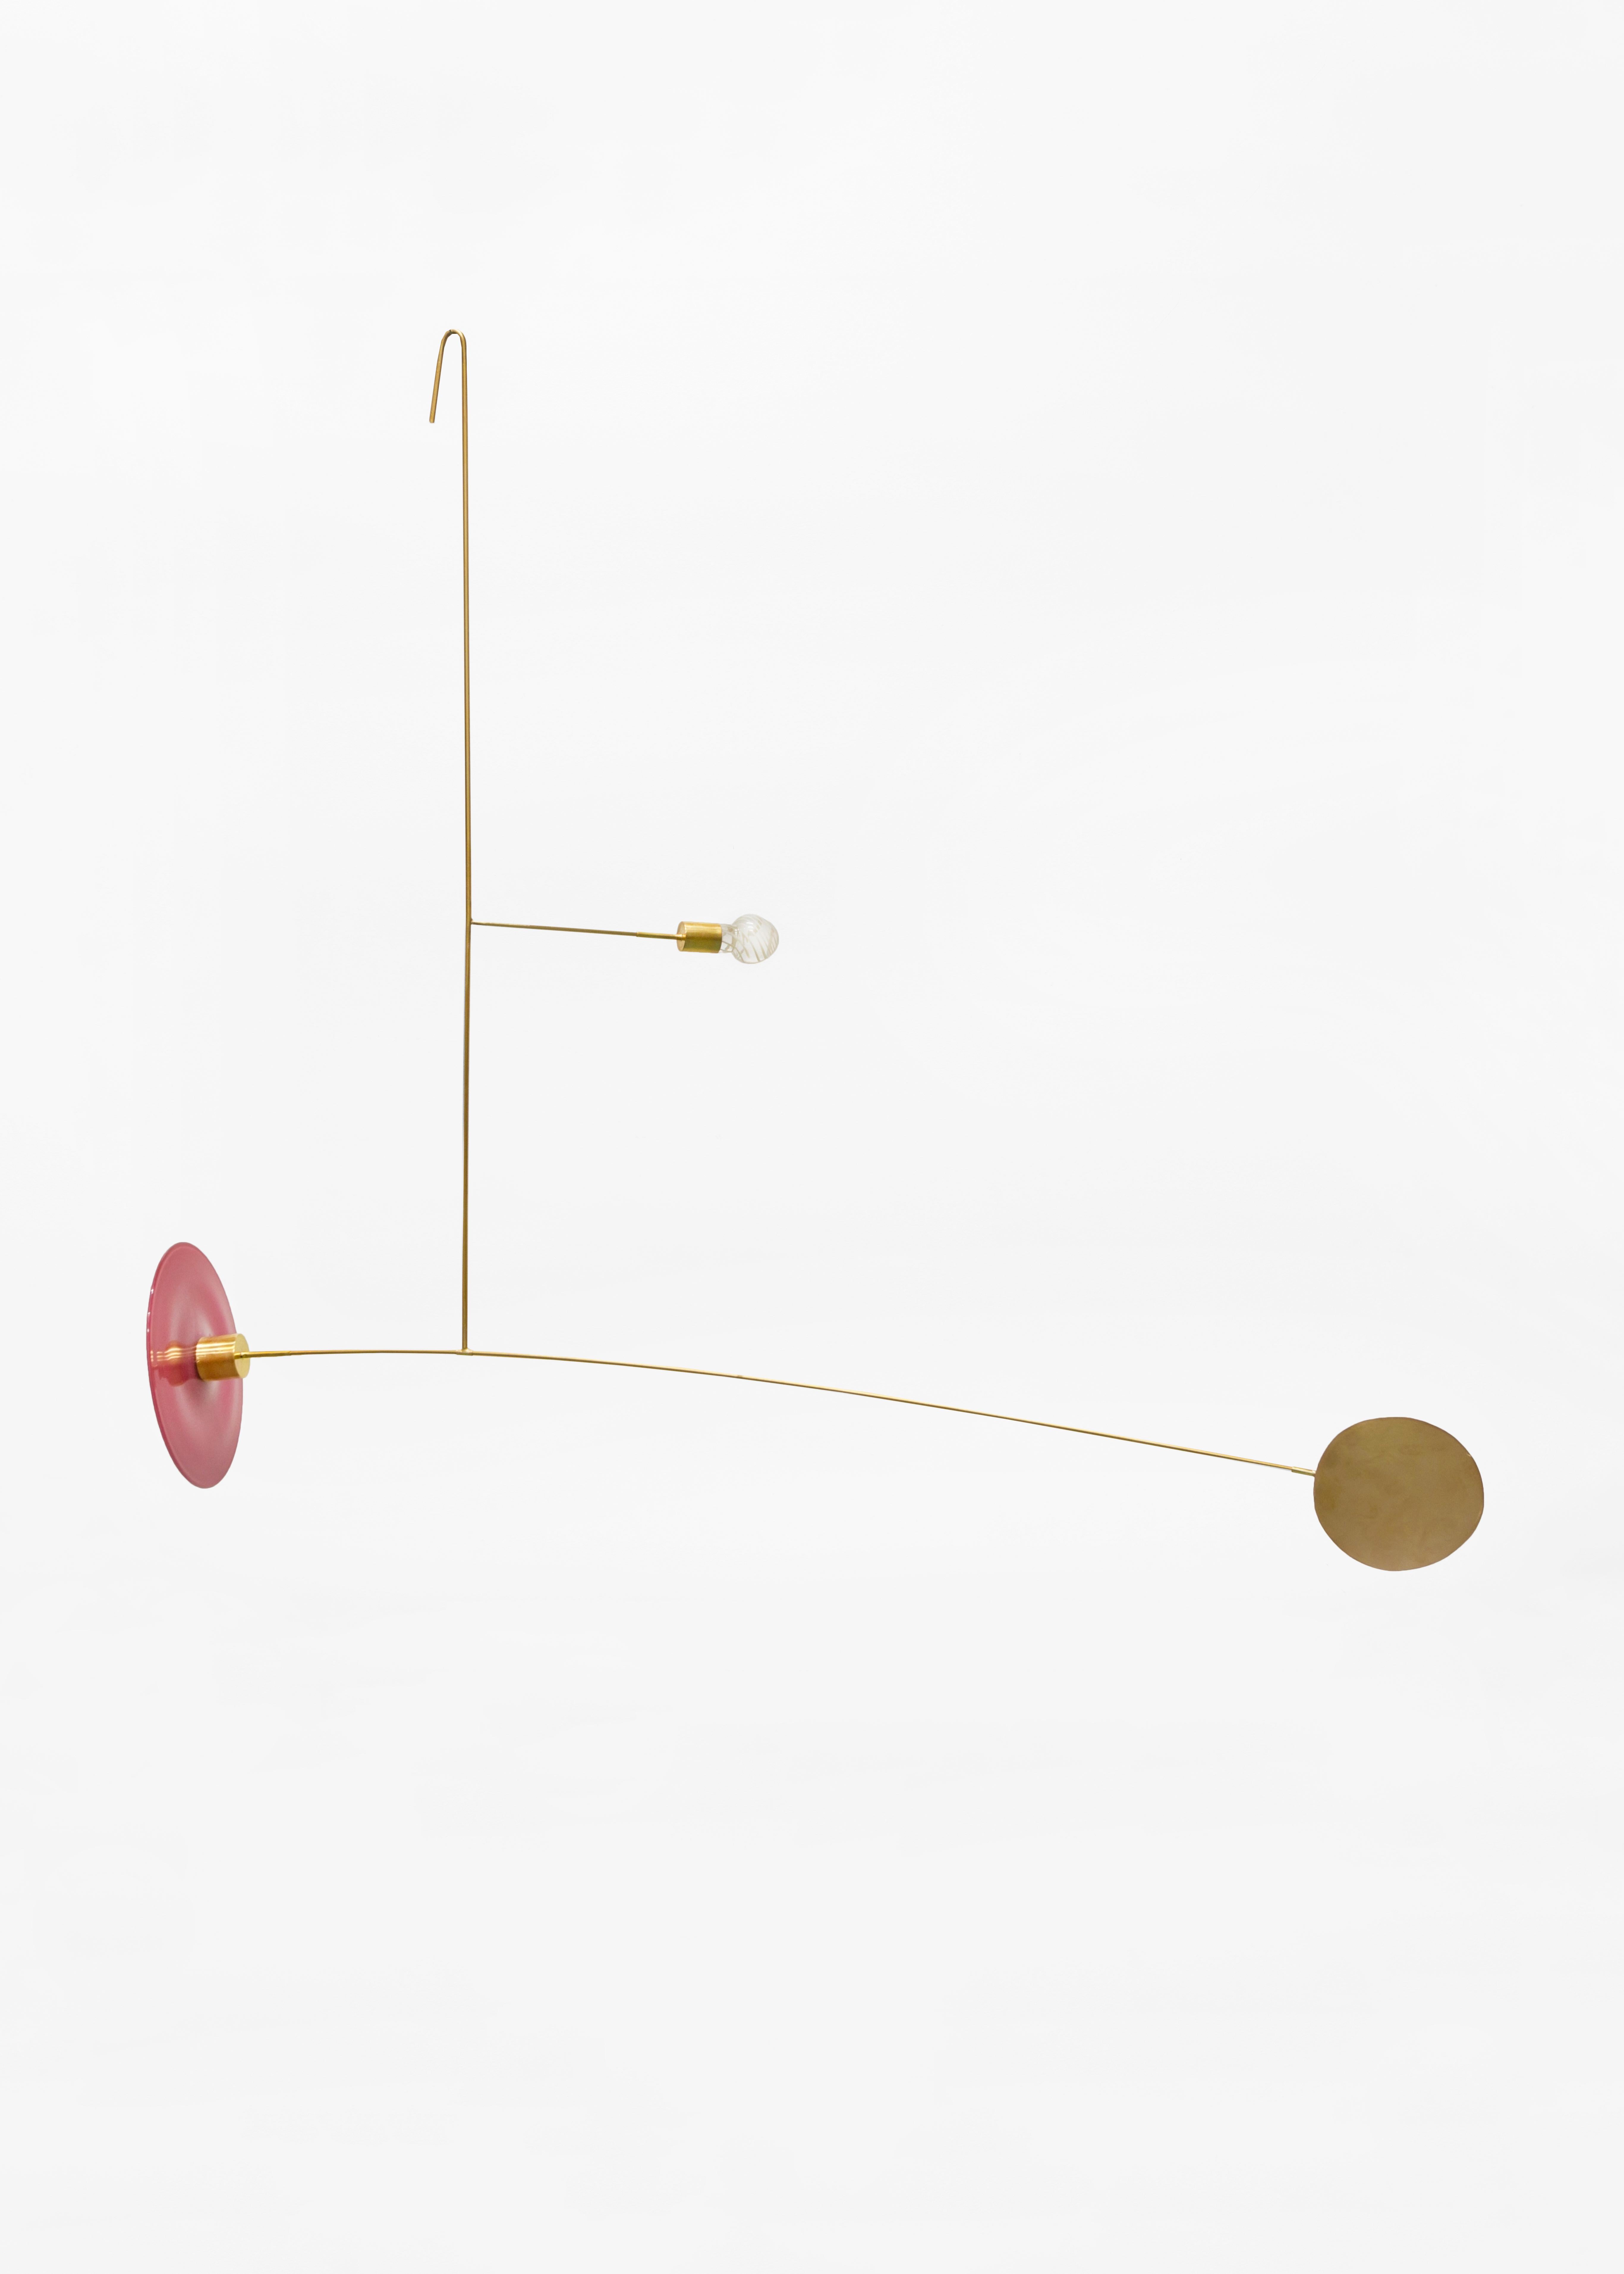 Glass mobile No. 80- by Milla Vaahtera
Dimensions: 700 x 200 x 650 cm
Weight: 300g


Dialogue is a series of mobiles and stabiles made of free-blown glass and hand-worked brass.

Vaahtera began to work on this series in May 2017 together with